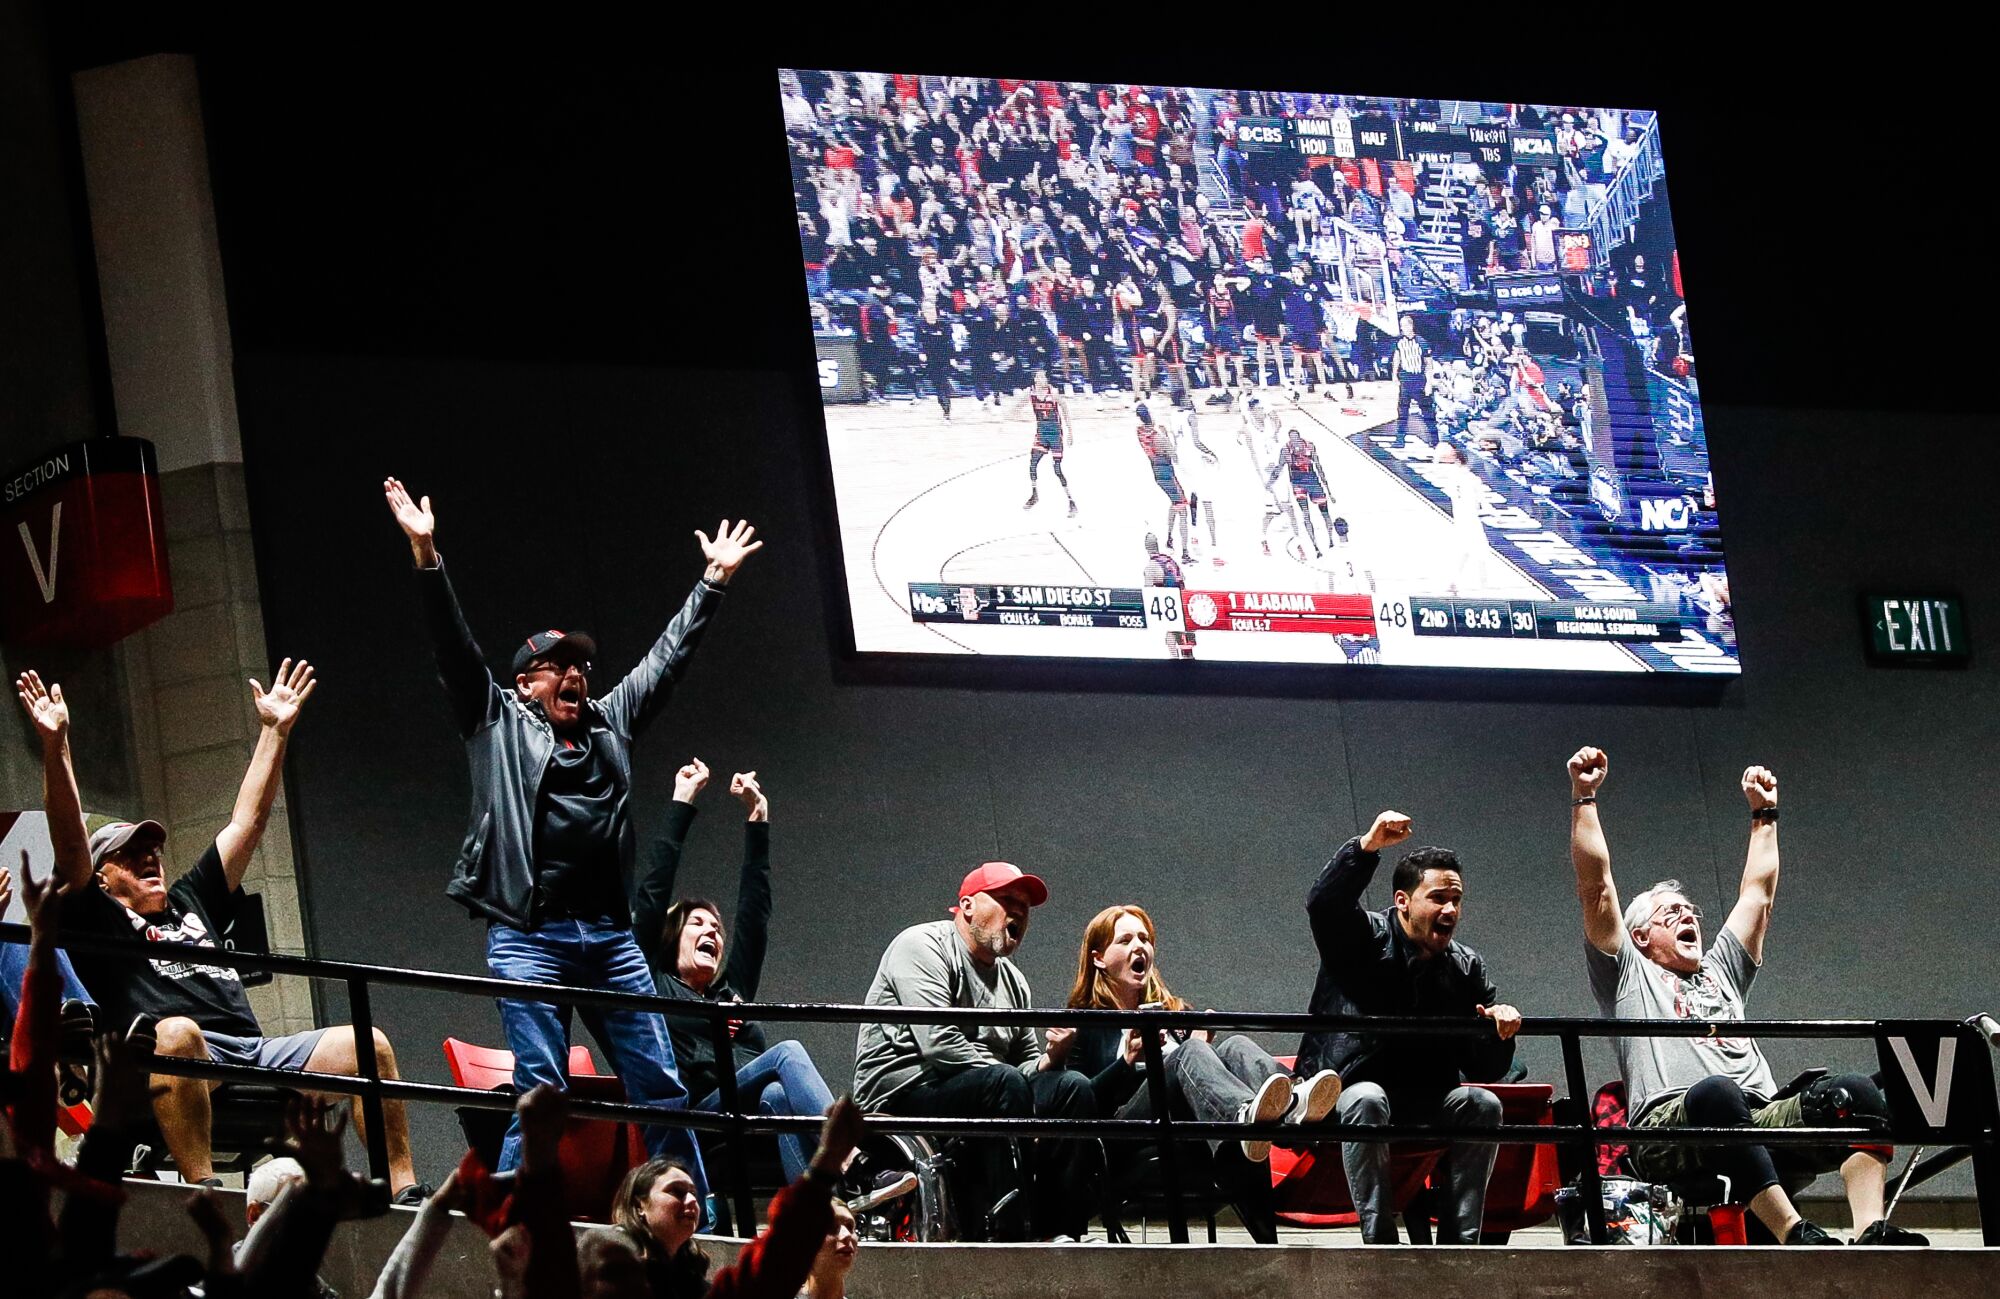 San Diego State fans celebrate an Aztecs' basket against Alabama during their Sweet 16 